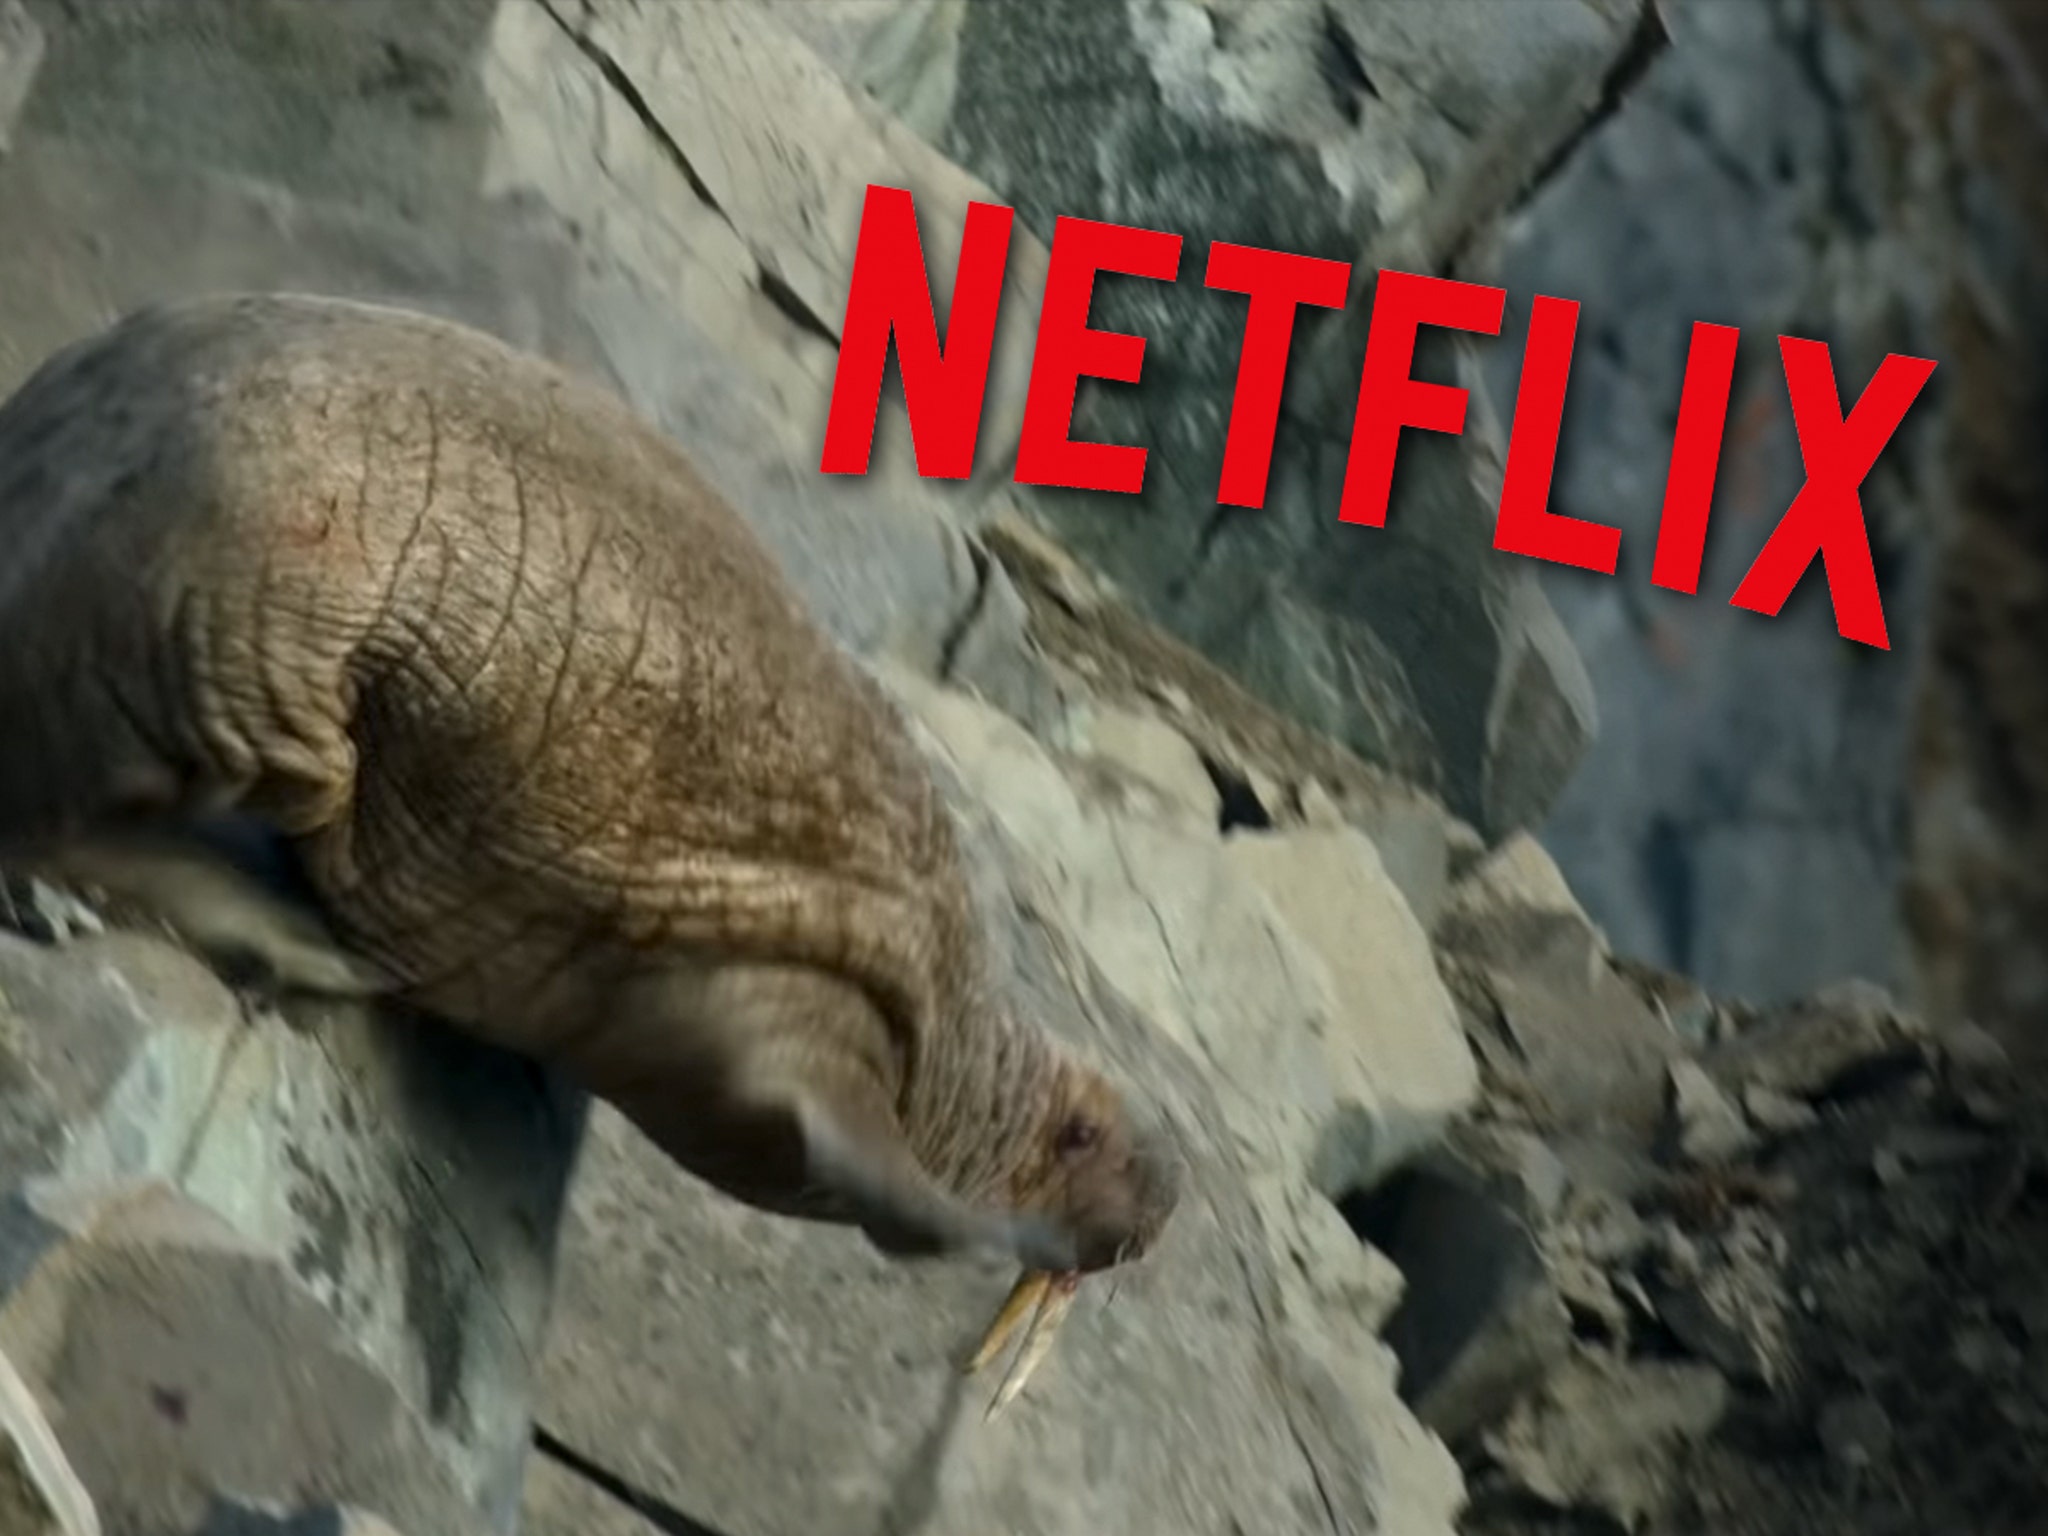 Netflix Issues Warning Over Graphic Scenes in 'Our Planet' Docuseries